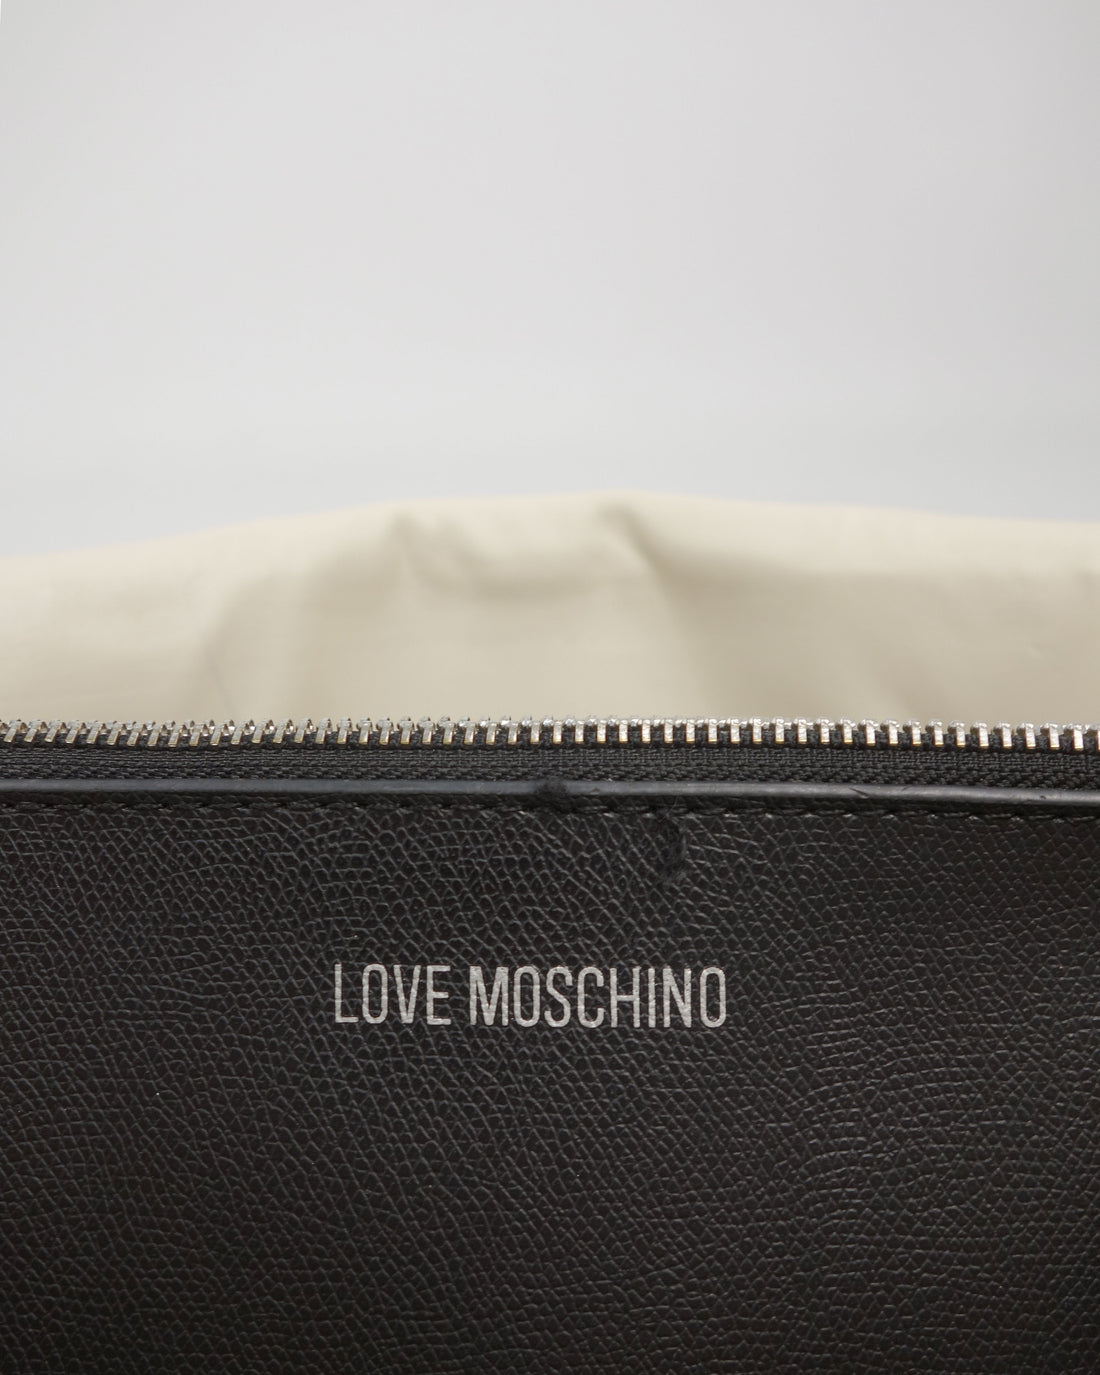 Moschino Black Leather Briefcase Bag 2000's